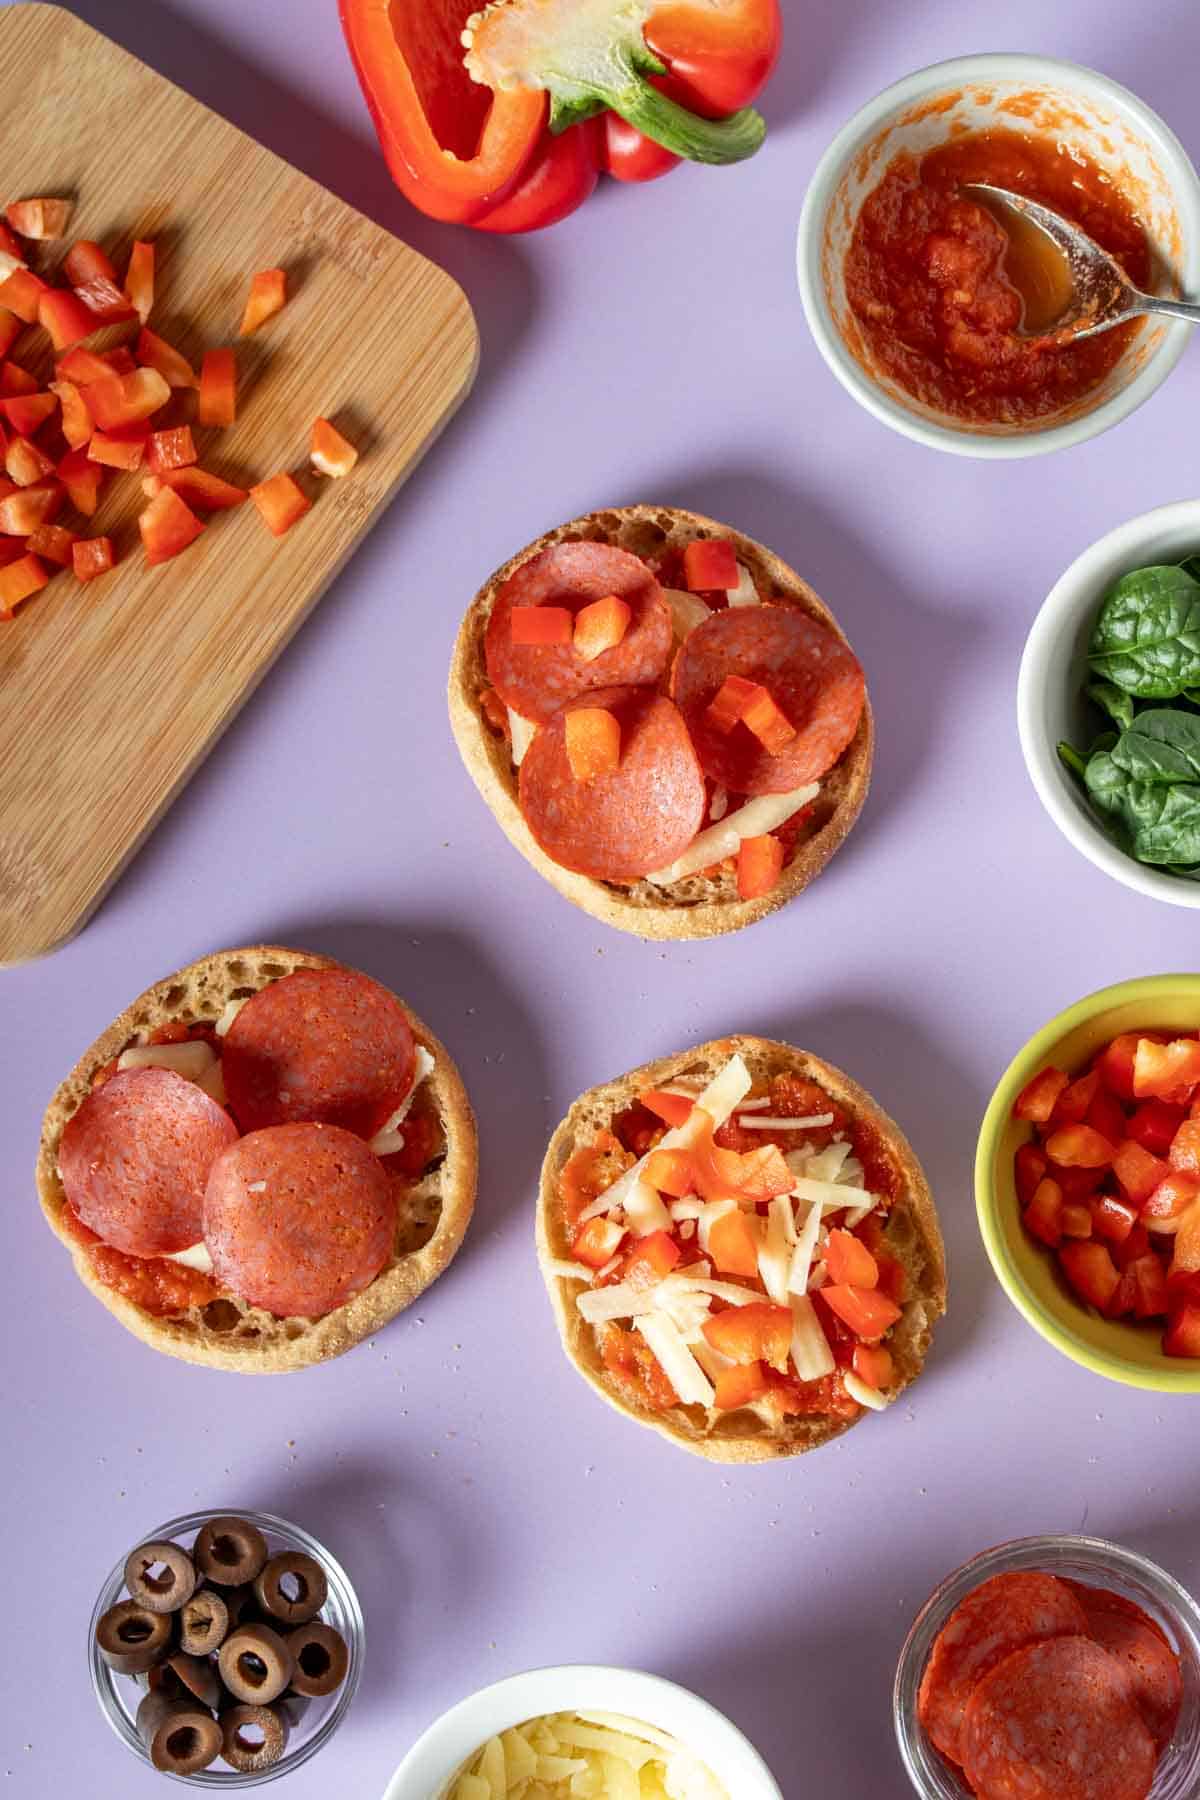 English muffins being made into pizzas sitting on a purple surface with ingredients around them.